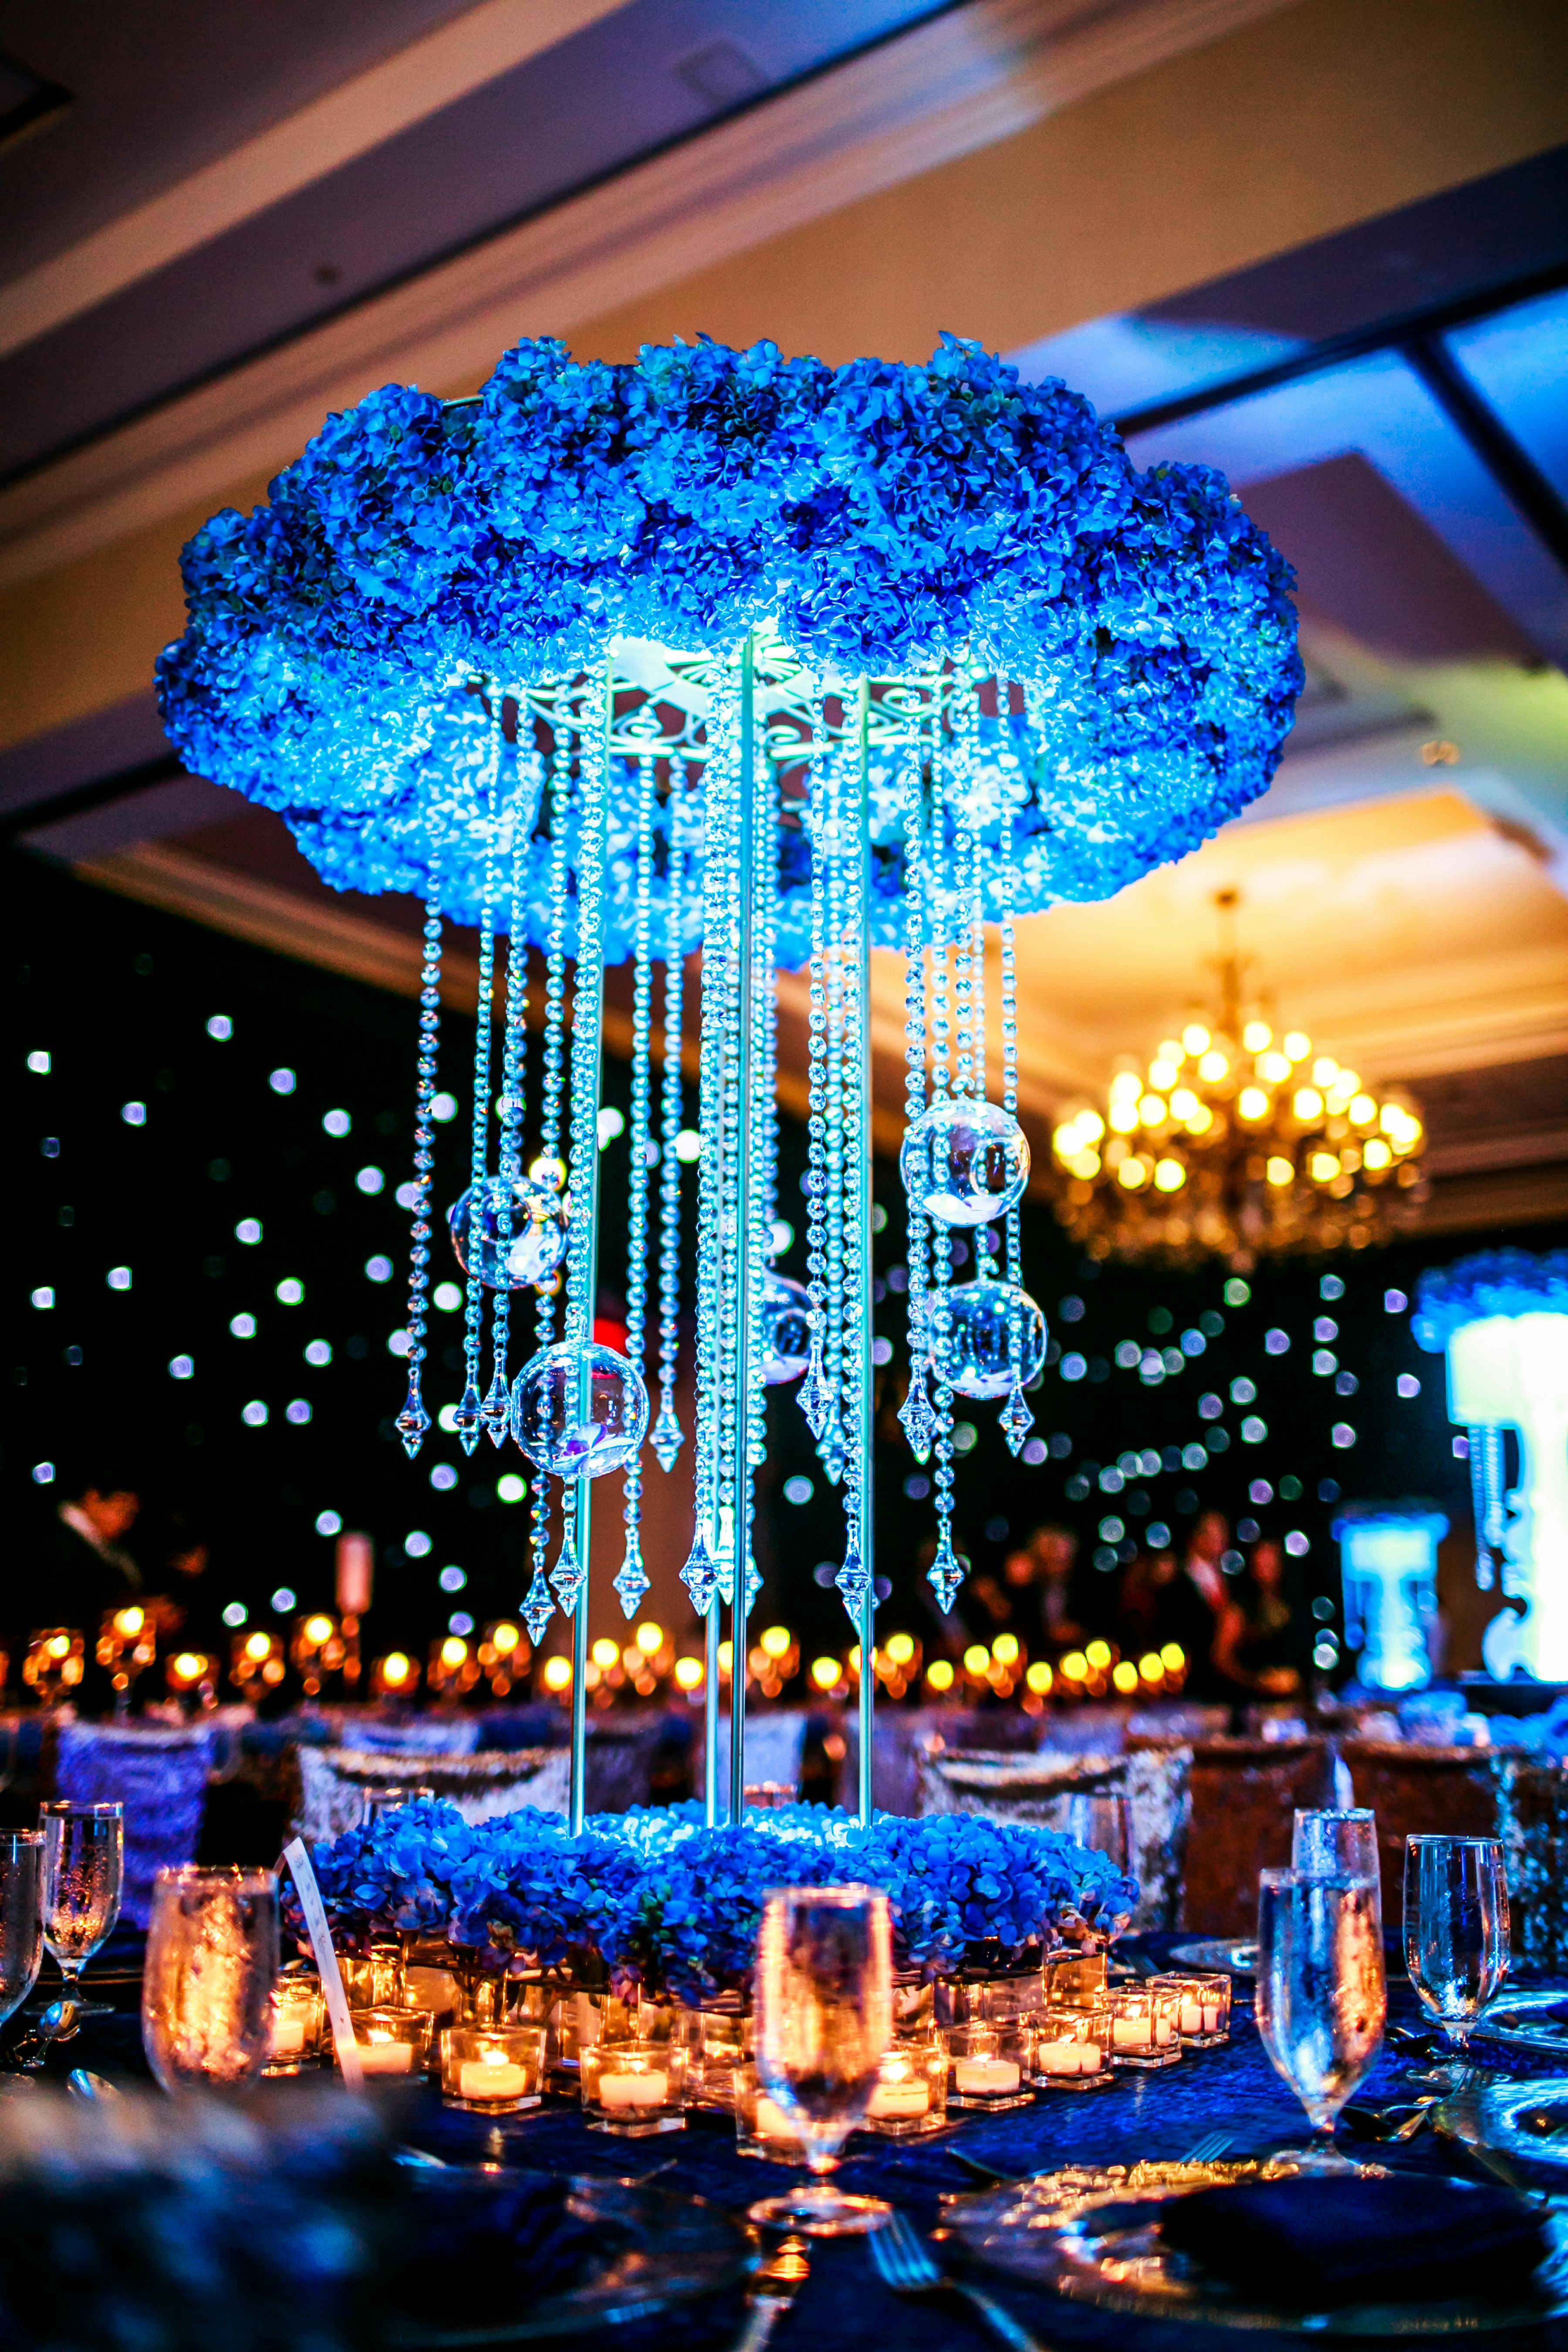 Towering Wedding Centerpiece with Wreath of Blue Hydrangeas and Suspended Crystals and Glass Globes